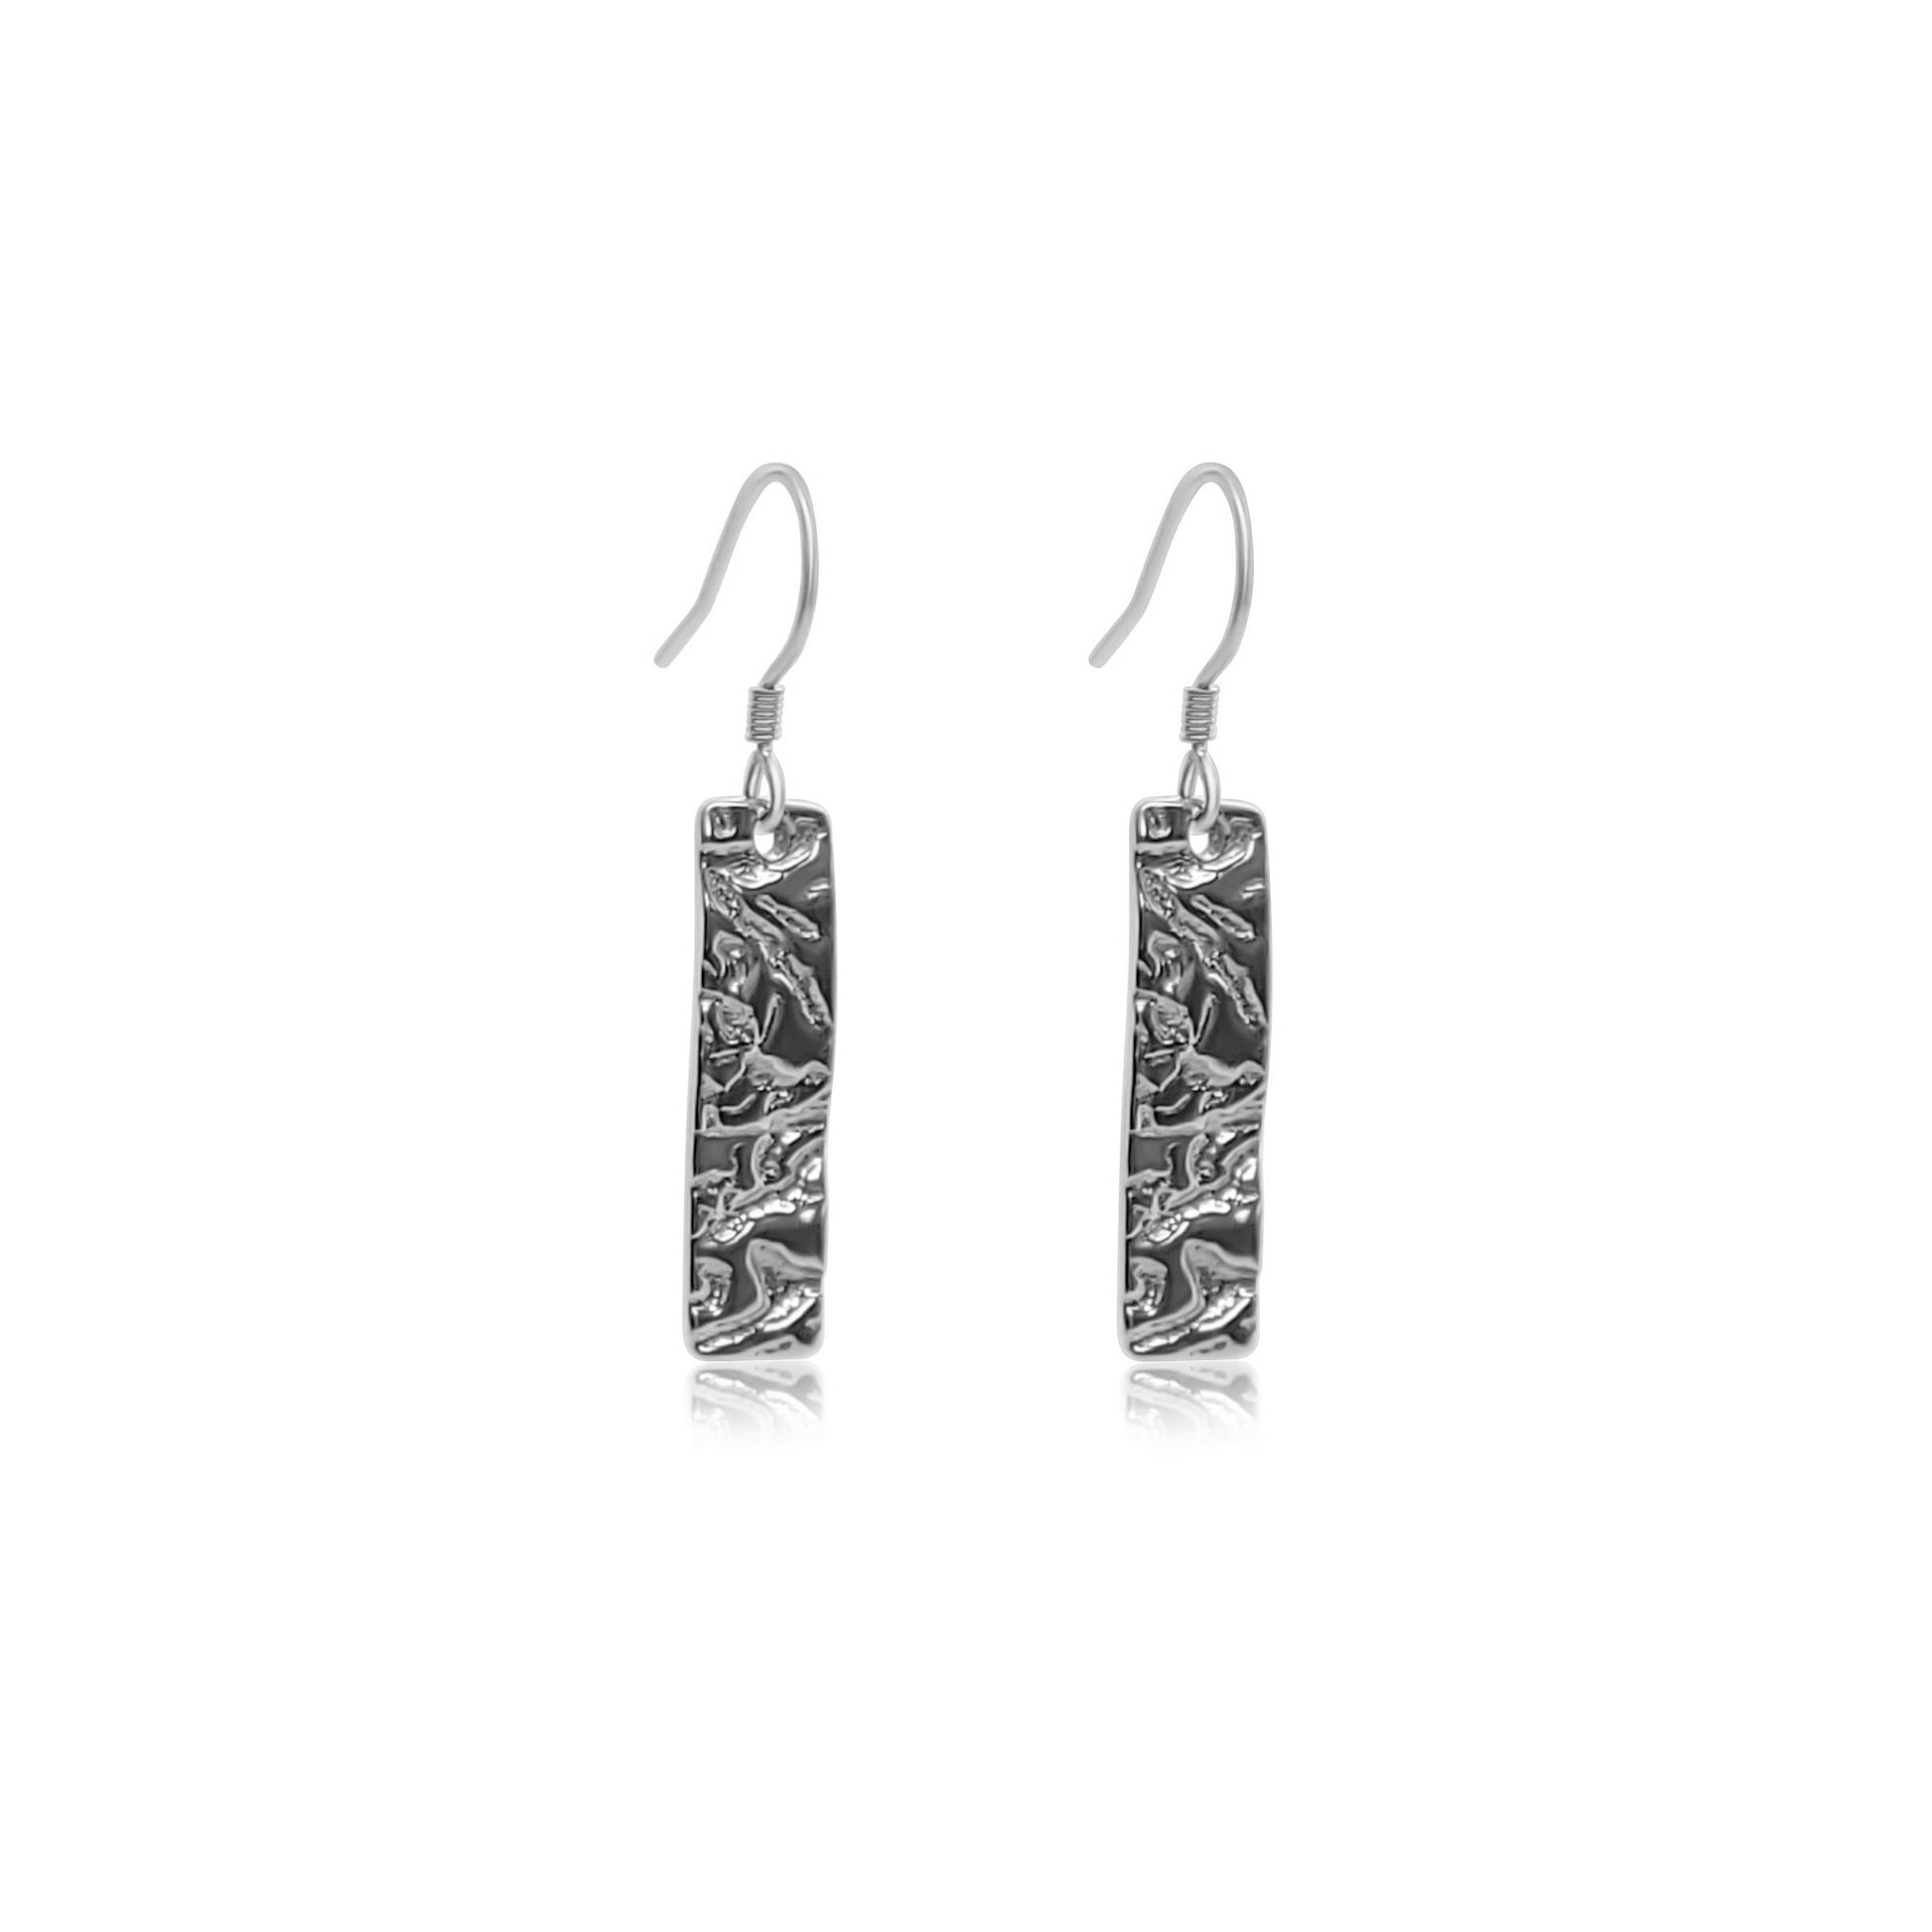 sterling silver drop earrings with thin rectangle pendant with a natural driftwood texture on the silver